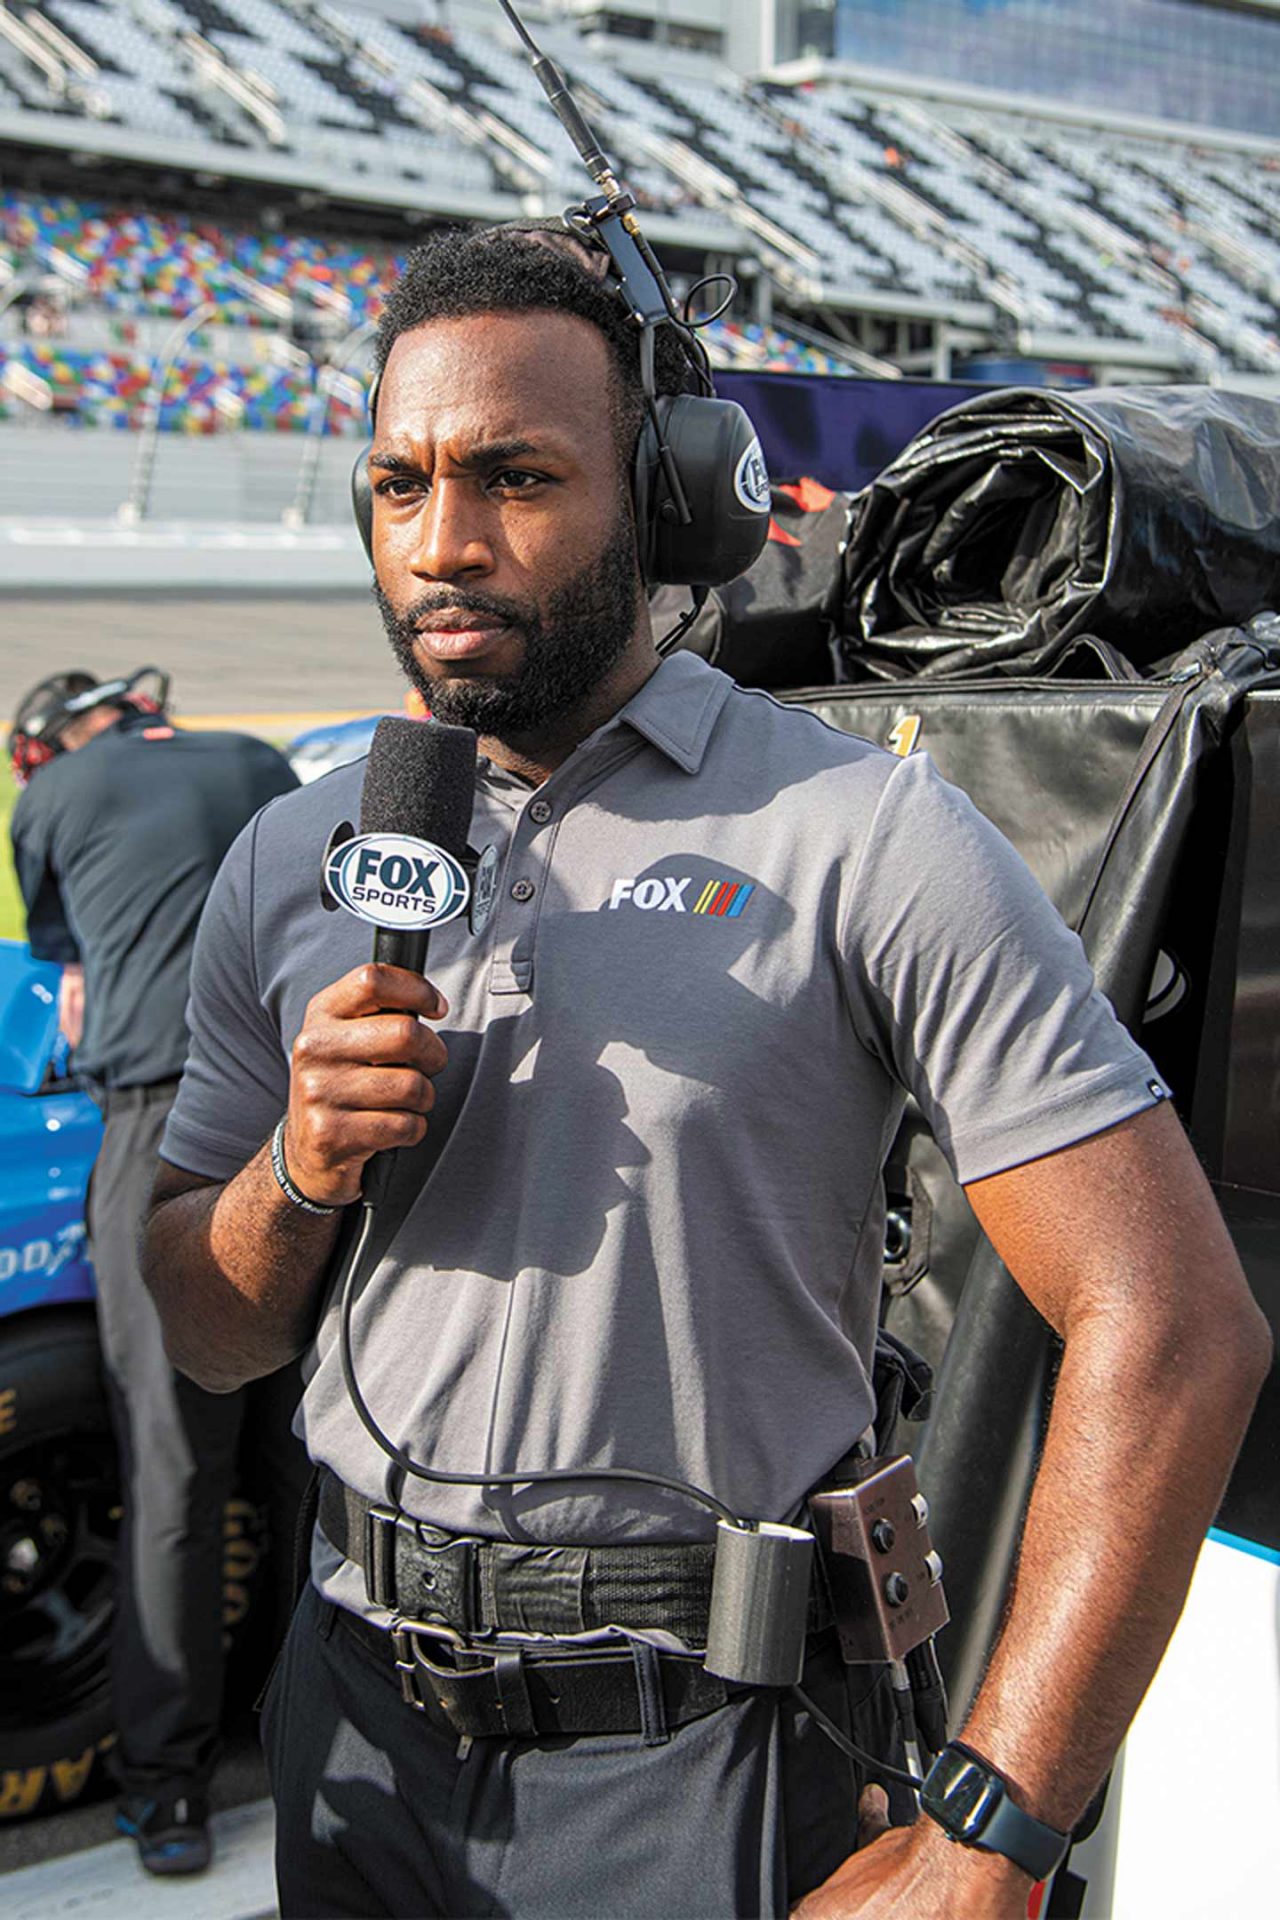 NASCAR reporter Josh Sims holding a FOX Sports microphone on the sidelines of a race track